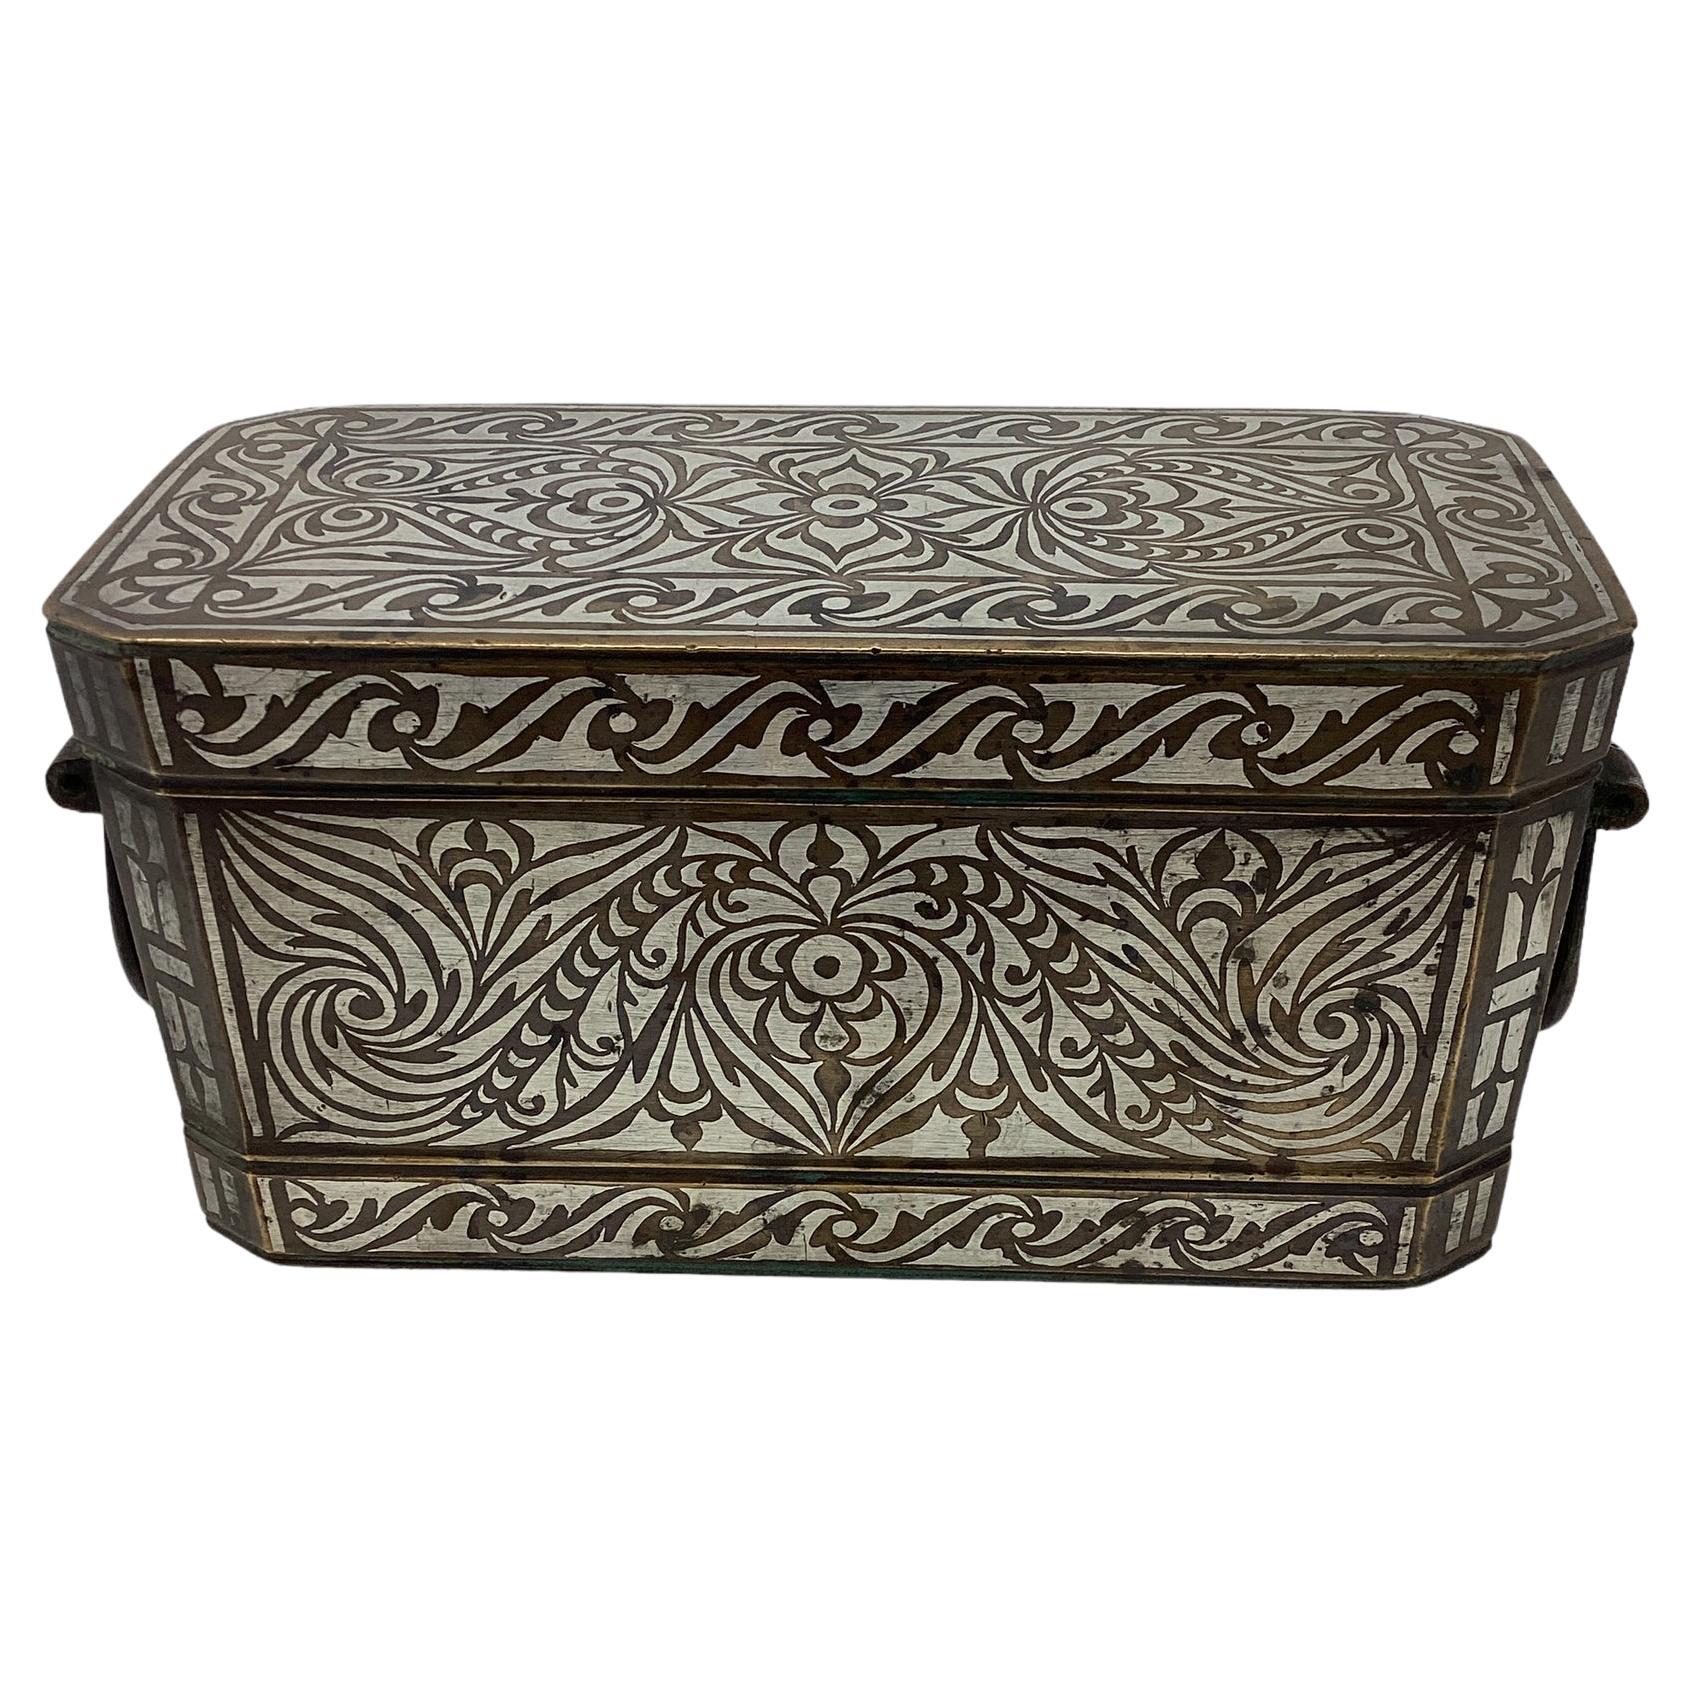  Antique Bronze and Silver Inlaid Betel Nut Box For Sale